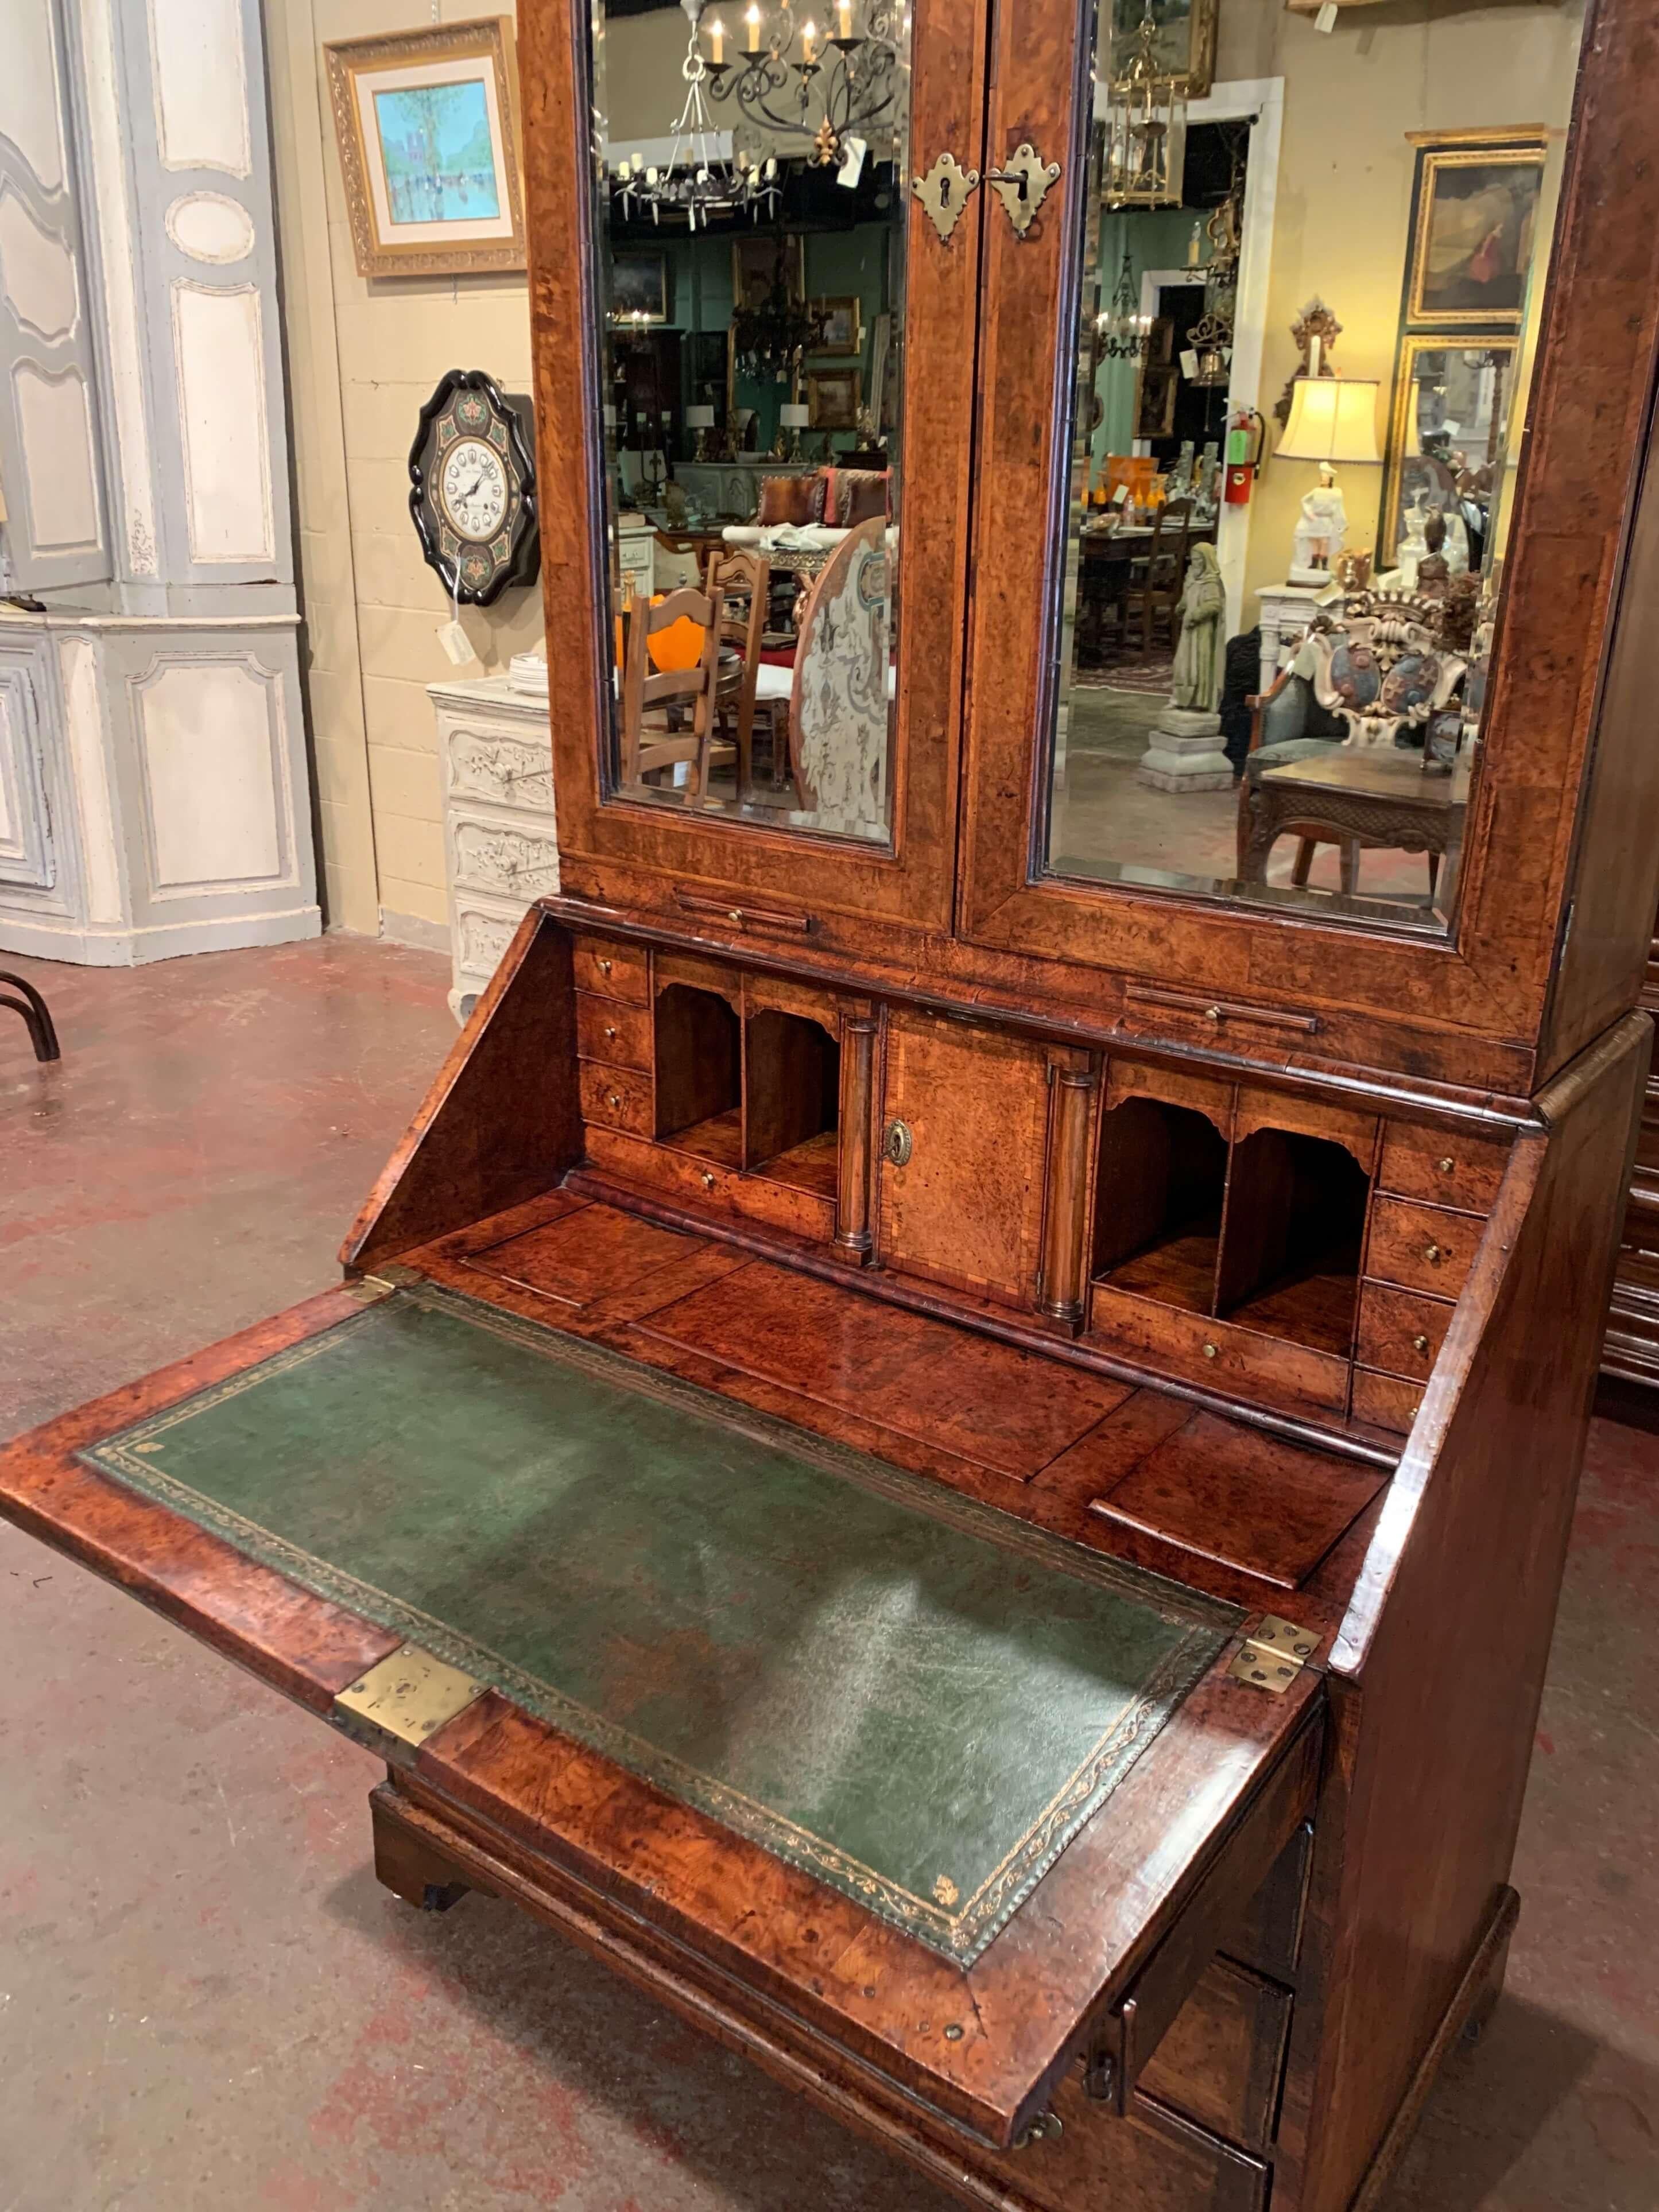 Created in England circa 1720, and made of walnut and burl, this elegant antique secretary is built in two sections; the upper section boasting a desirable bonnet Top is decorated with three carved finials. The beveled mirrored doors Open to reveal